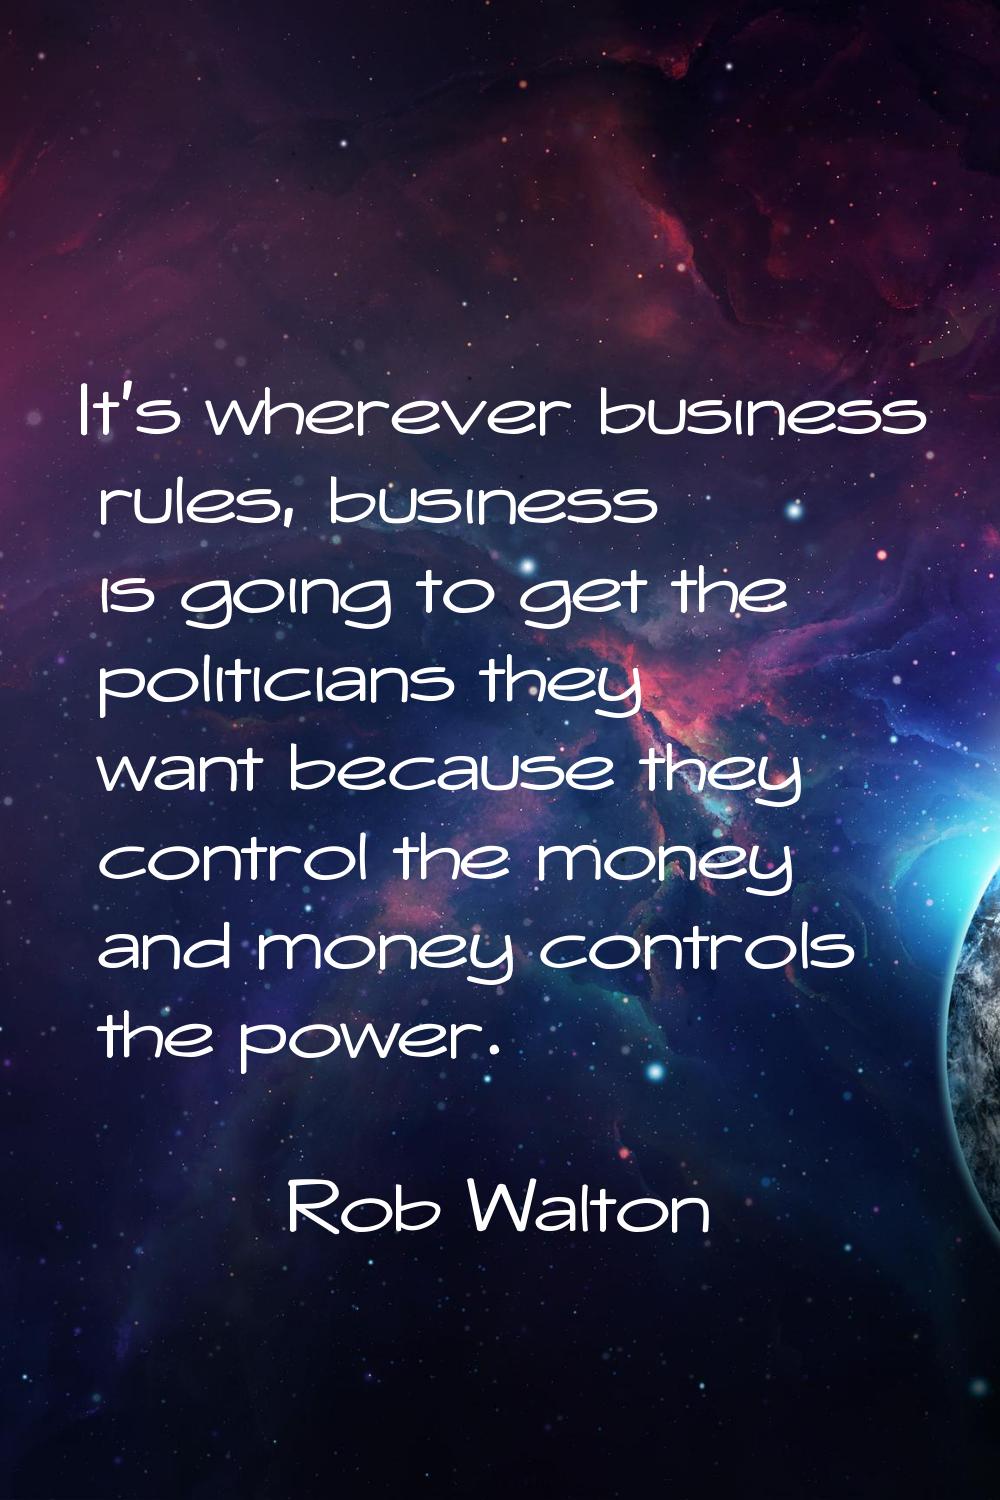 It's wherever business rules, business is going to get the politicians they want because they contr